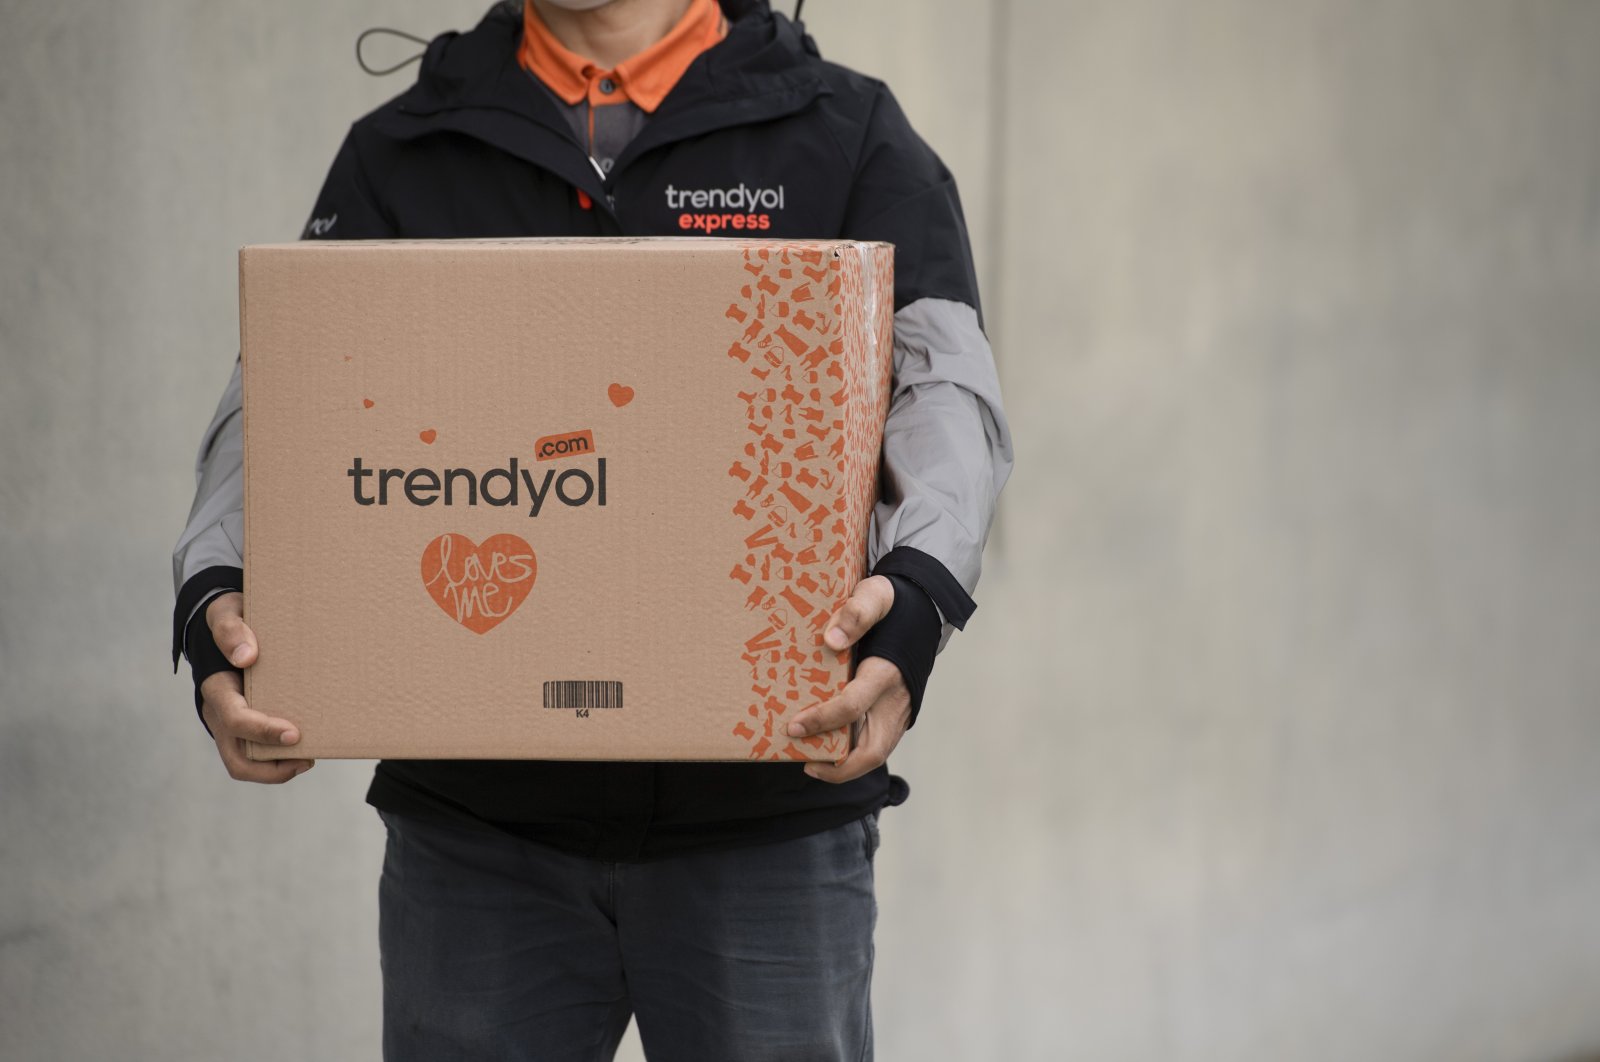 A Trendyol worker holds a package in this undated photo. (Courtesy of Trendyol)